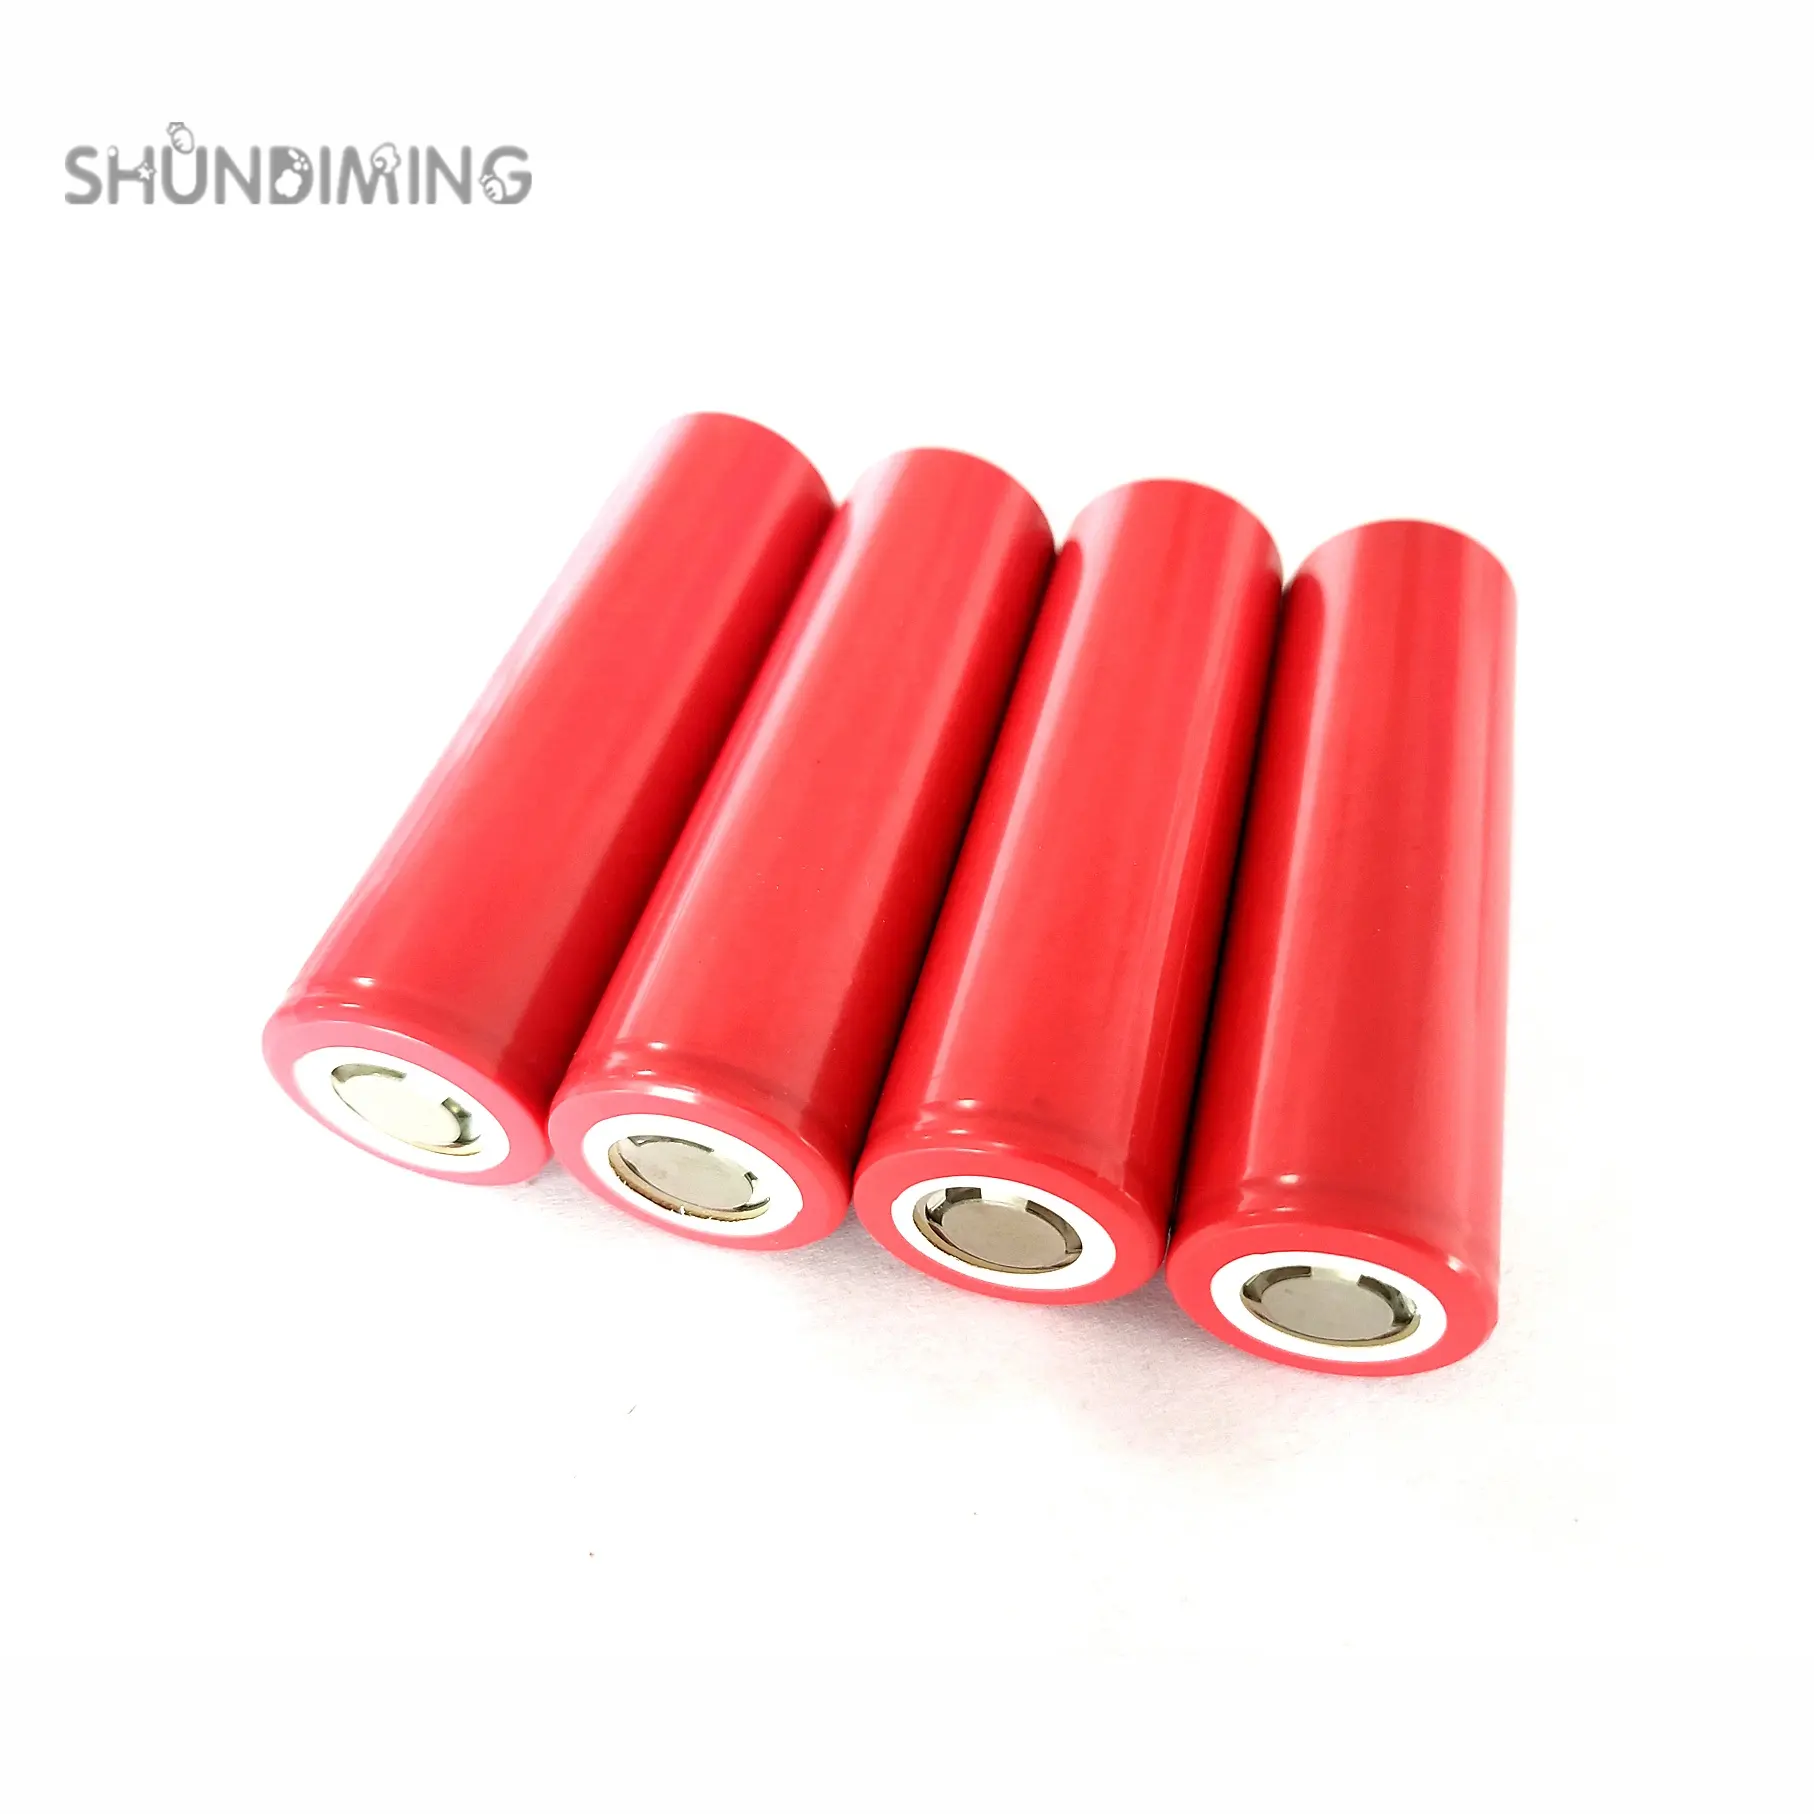 High Power Safety Usage 3.7V Rechargeable Li-Ion 21700 Tesla Battery 5000mAh Battery for Bicycle